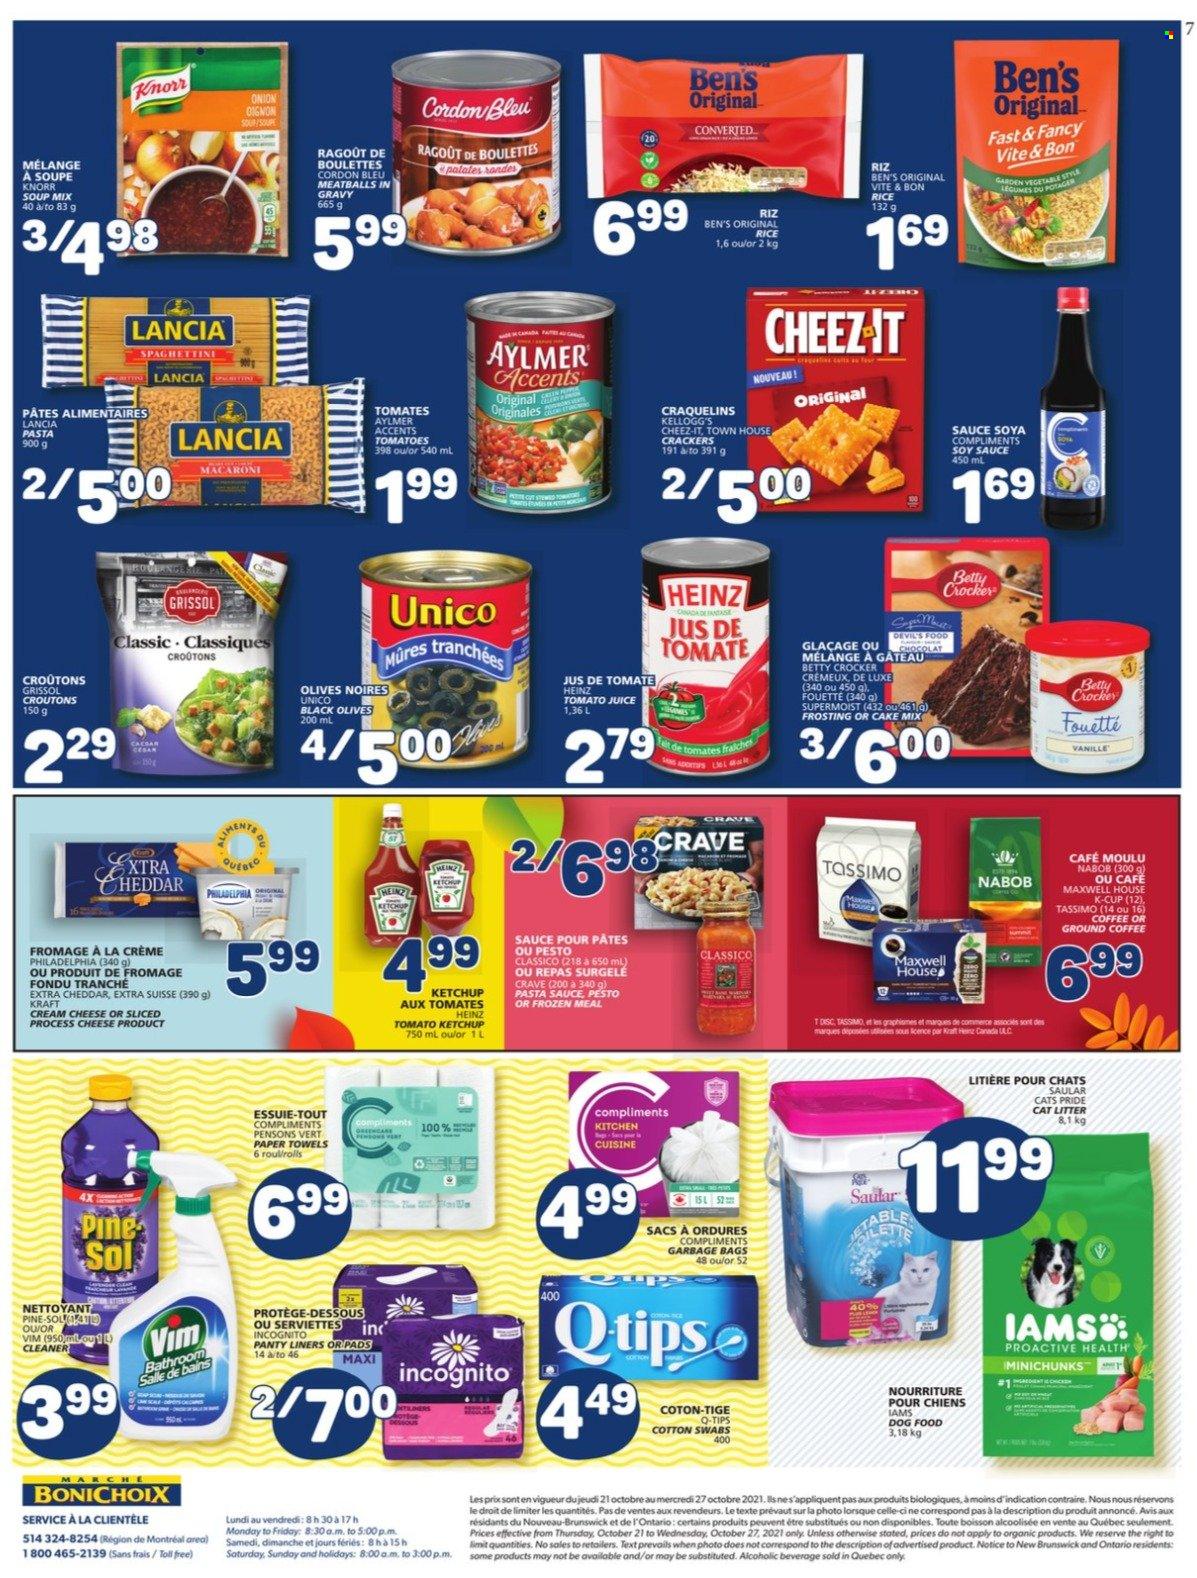 thumbnail - Marché Bonichoix Flyer - October 21, 2021 - October 27, 2021 - Sales products - cake mix, tomatoes, pasta sauce, meatballs, soup mix, macaroni, soup, Kraft®, crackers, Kellogg's, Cheez-It, croutons, frosting, Heinz, rice, soy sauce, Classico, tomato juice, juice, Maxwell House, coffee, ground coffee, coffee capsules, K-Cups, kitchen towels, paper towels, cleaner, XTRA, Knorr, ketchup, pesto, Philadelphia, olives, cordon bleu. Page 7.